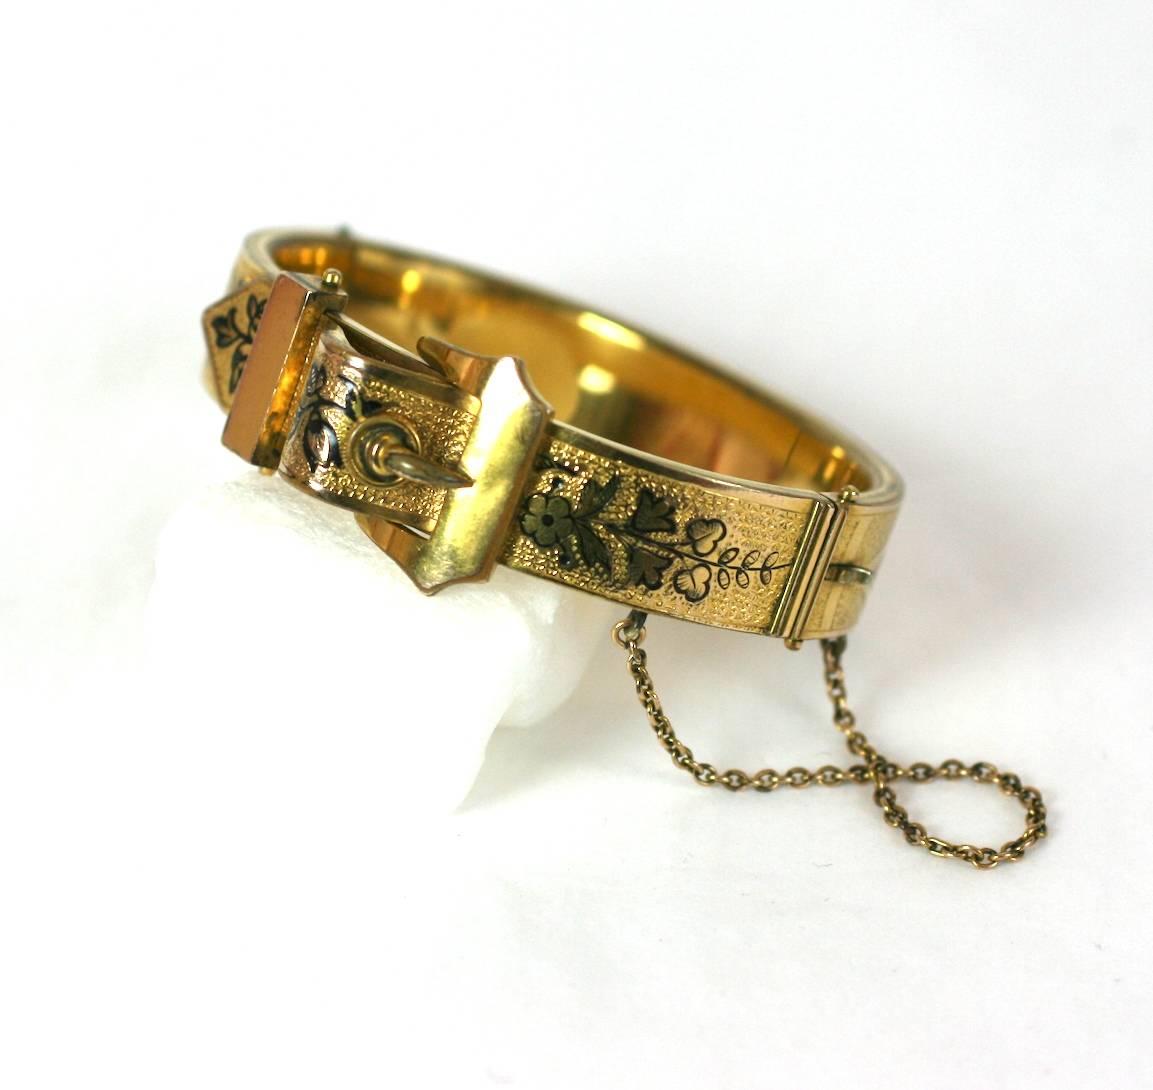 Attractive Victorian gold filled bangle with buckle motif and black enamel floral tracery. Engraved designs on obverse. Pull clasp with attached safety chain.
1880's USA. (dated 1880 on clasp!). Excellent condition. 
Bangle is .5